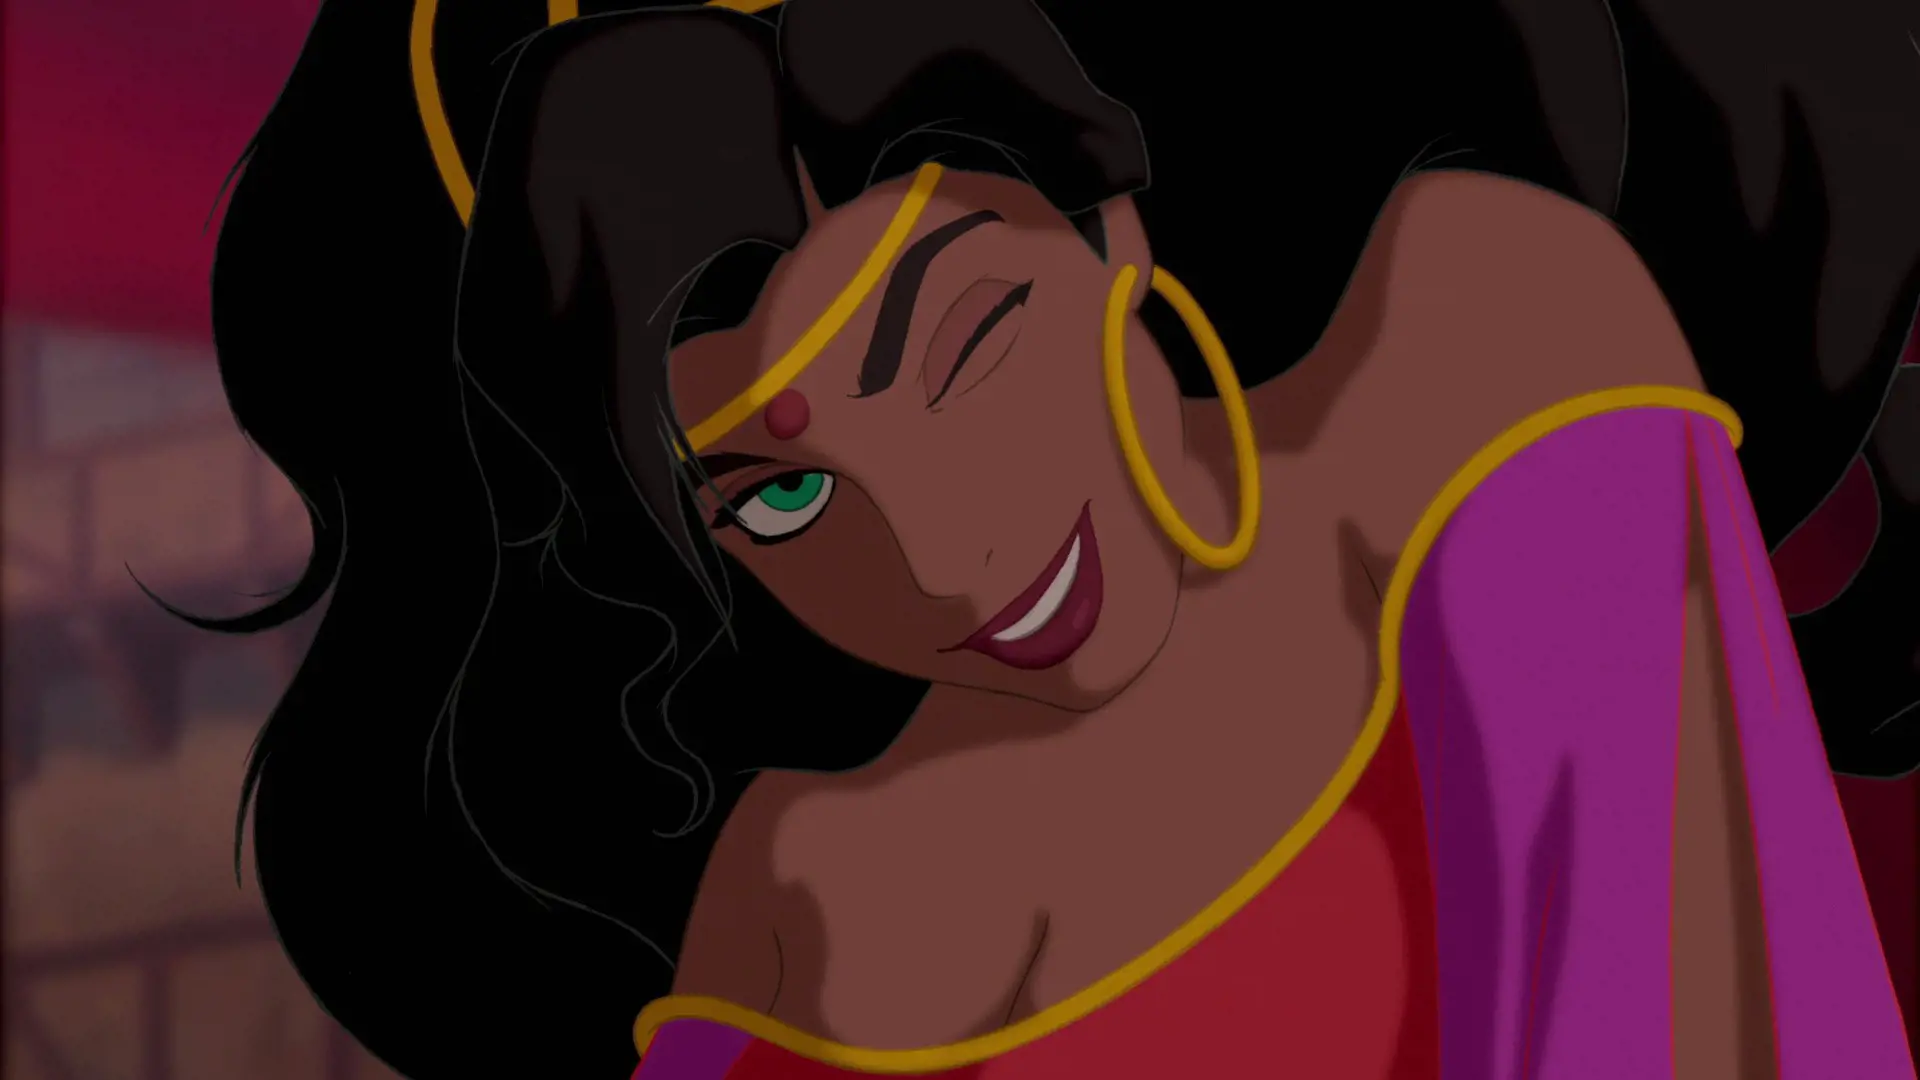 Esmeralda Performing A Dance For The Men On The Hunchback of Notre Dame